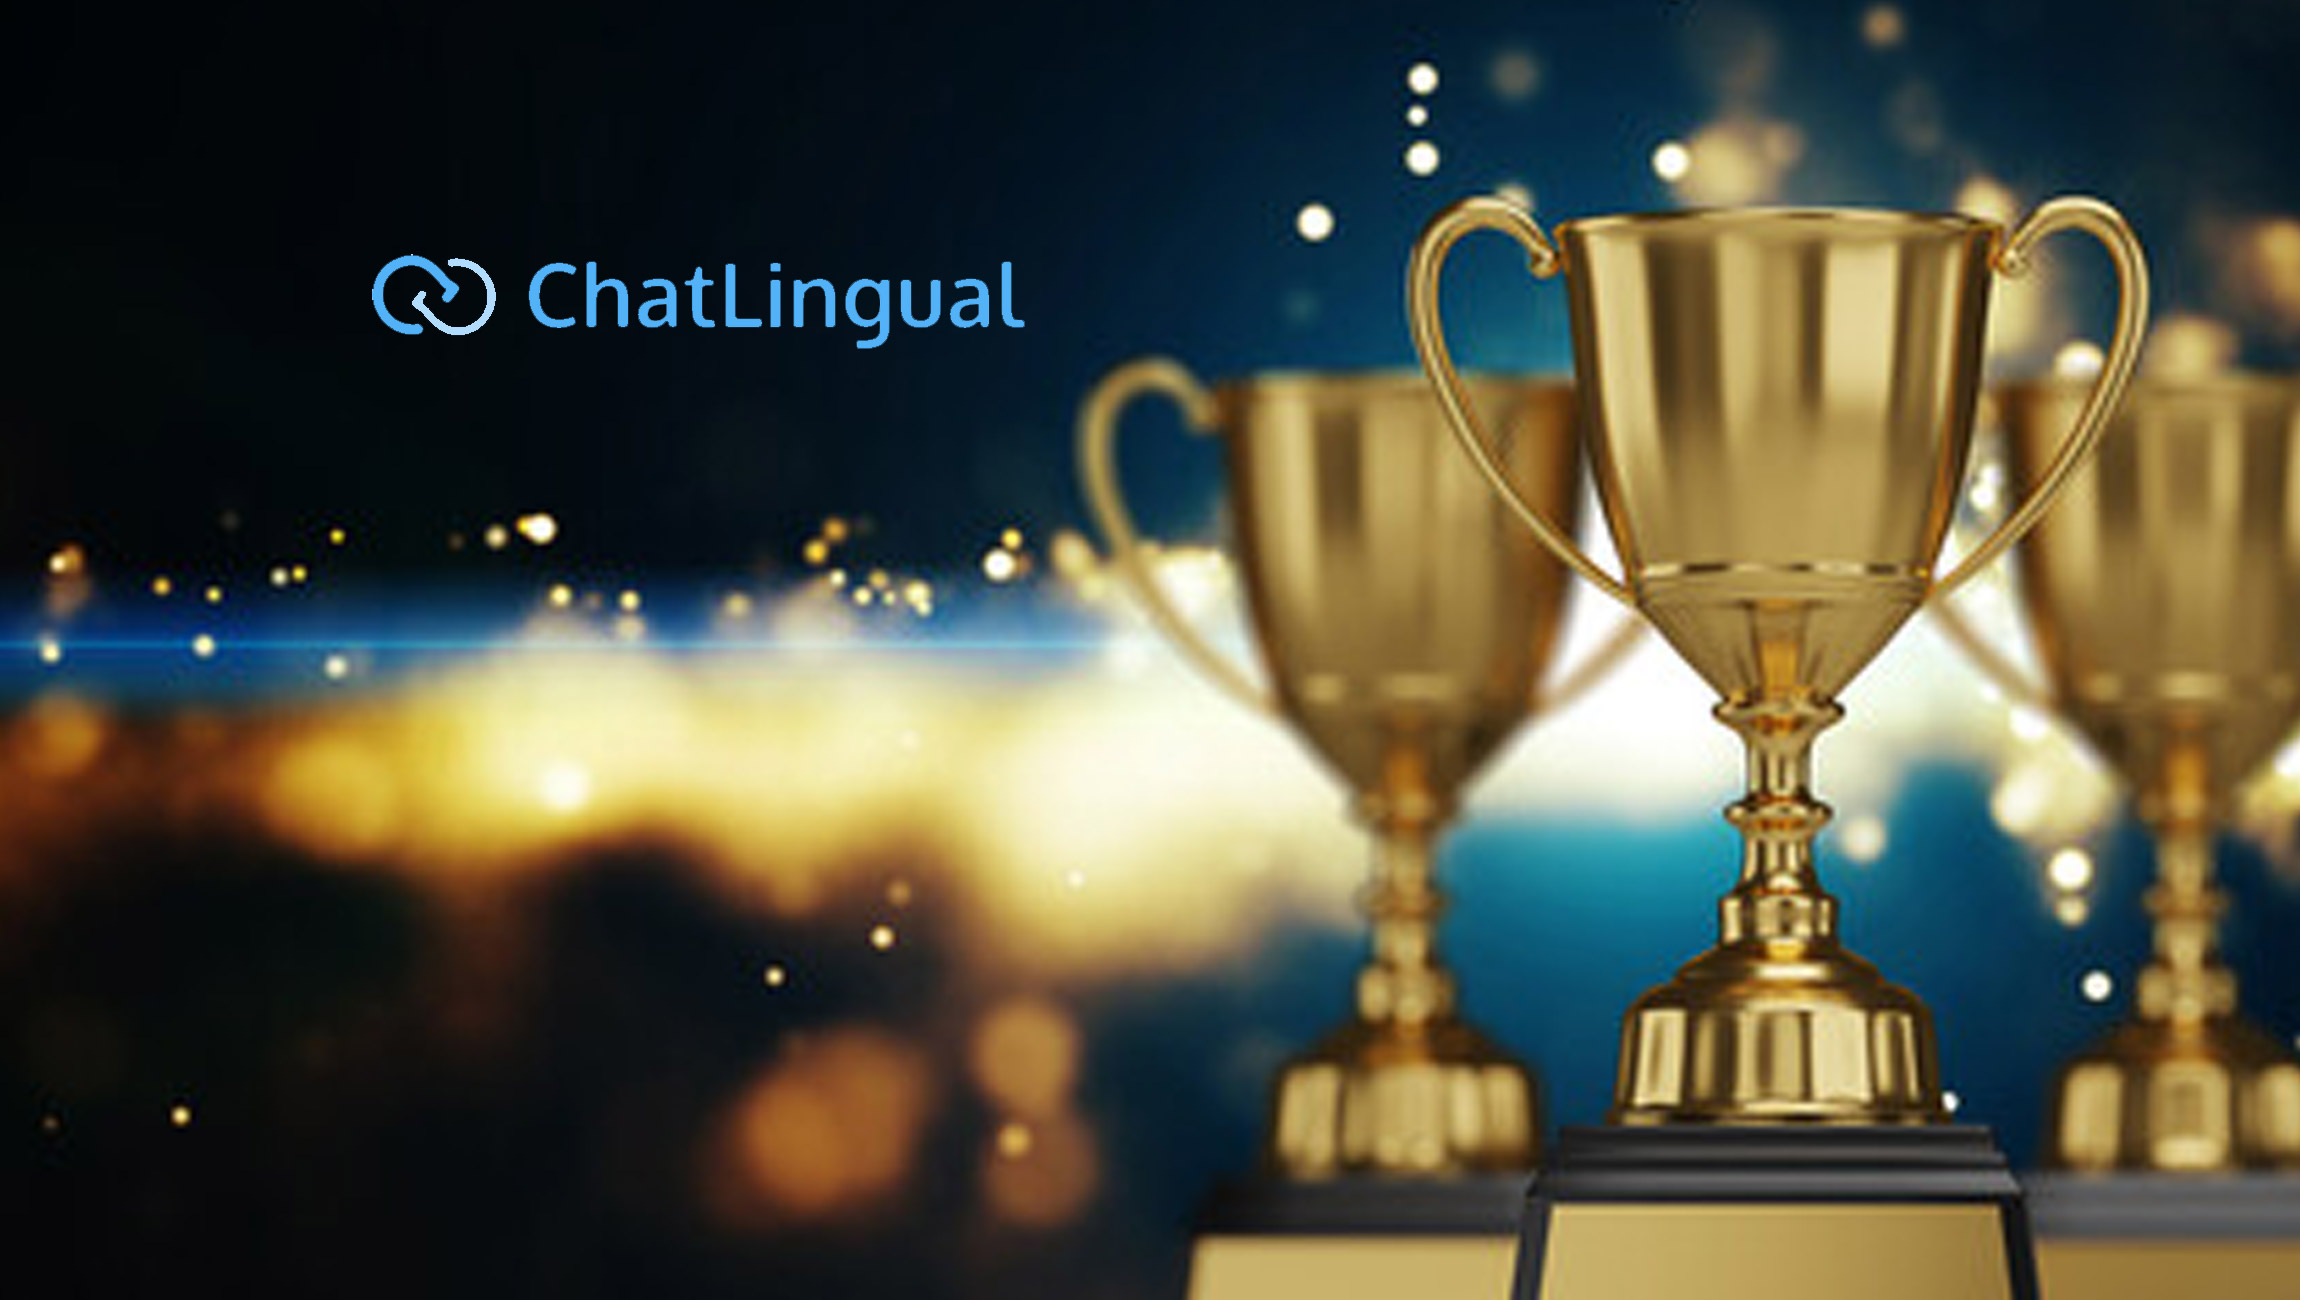 ChatLingual Wins 3 GlobeeGold Awards for Best Business Disruptor, Best Use of Tech in CX, and Most Innovative Tech Start-Up of the Year